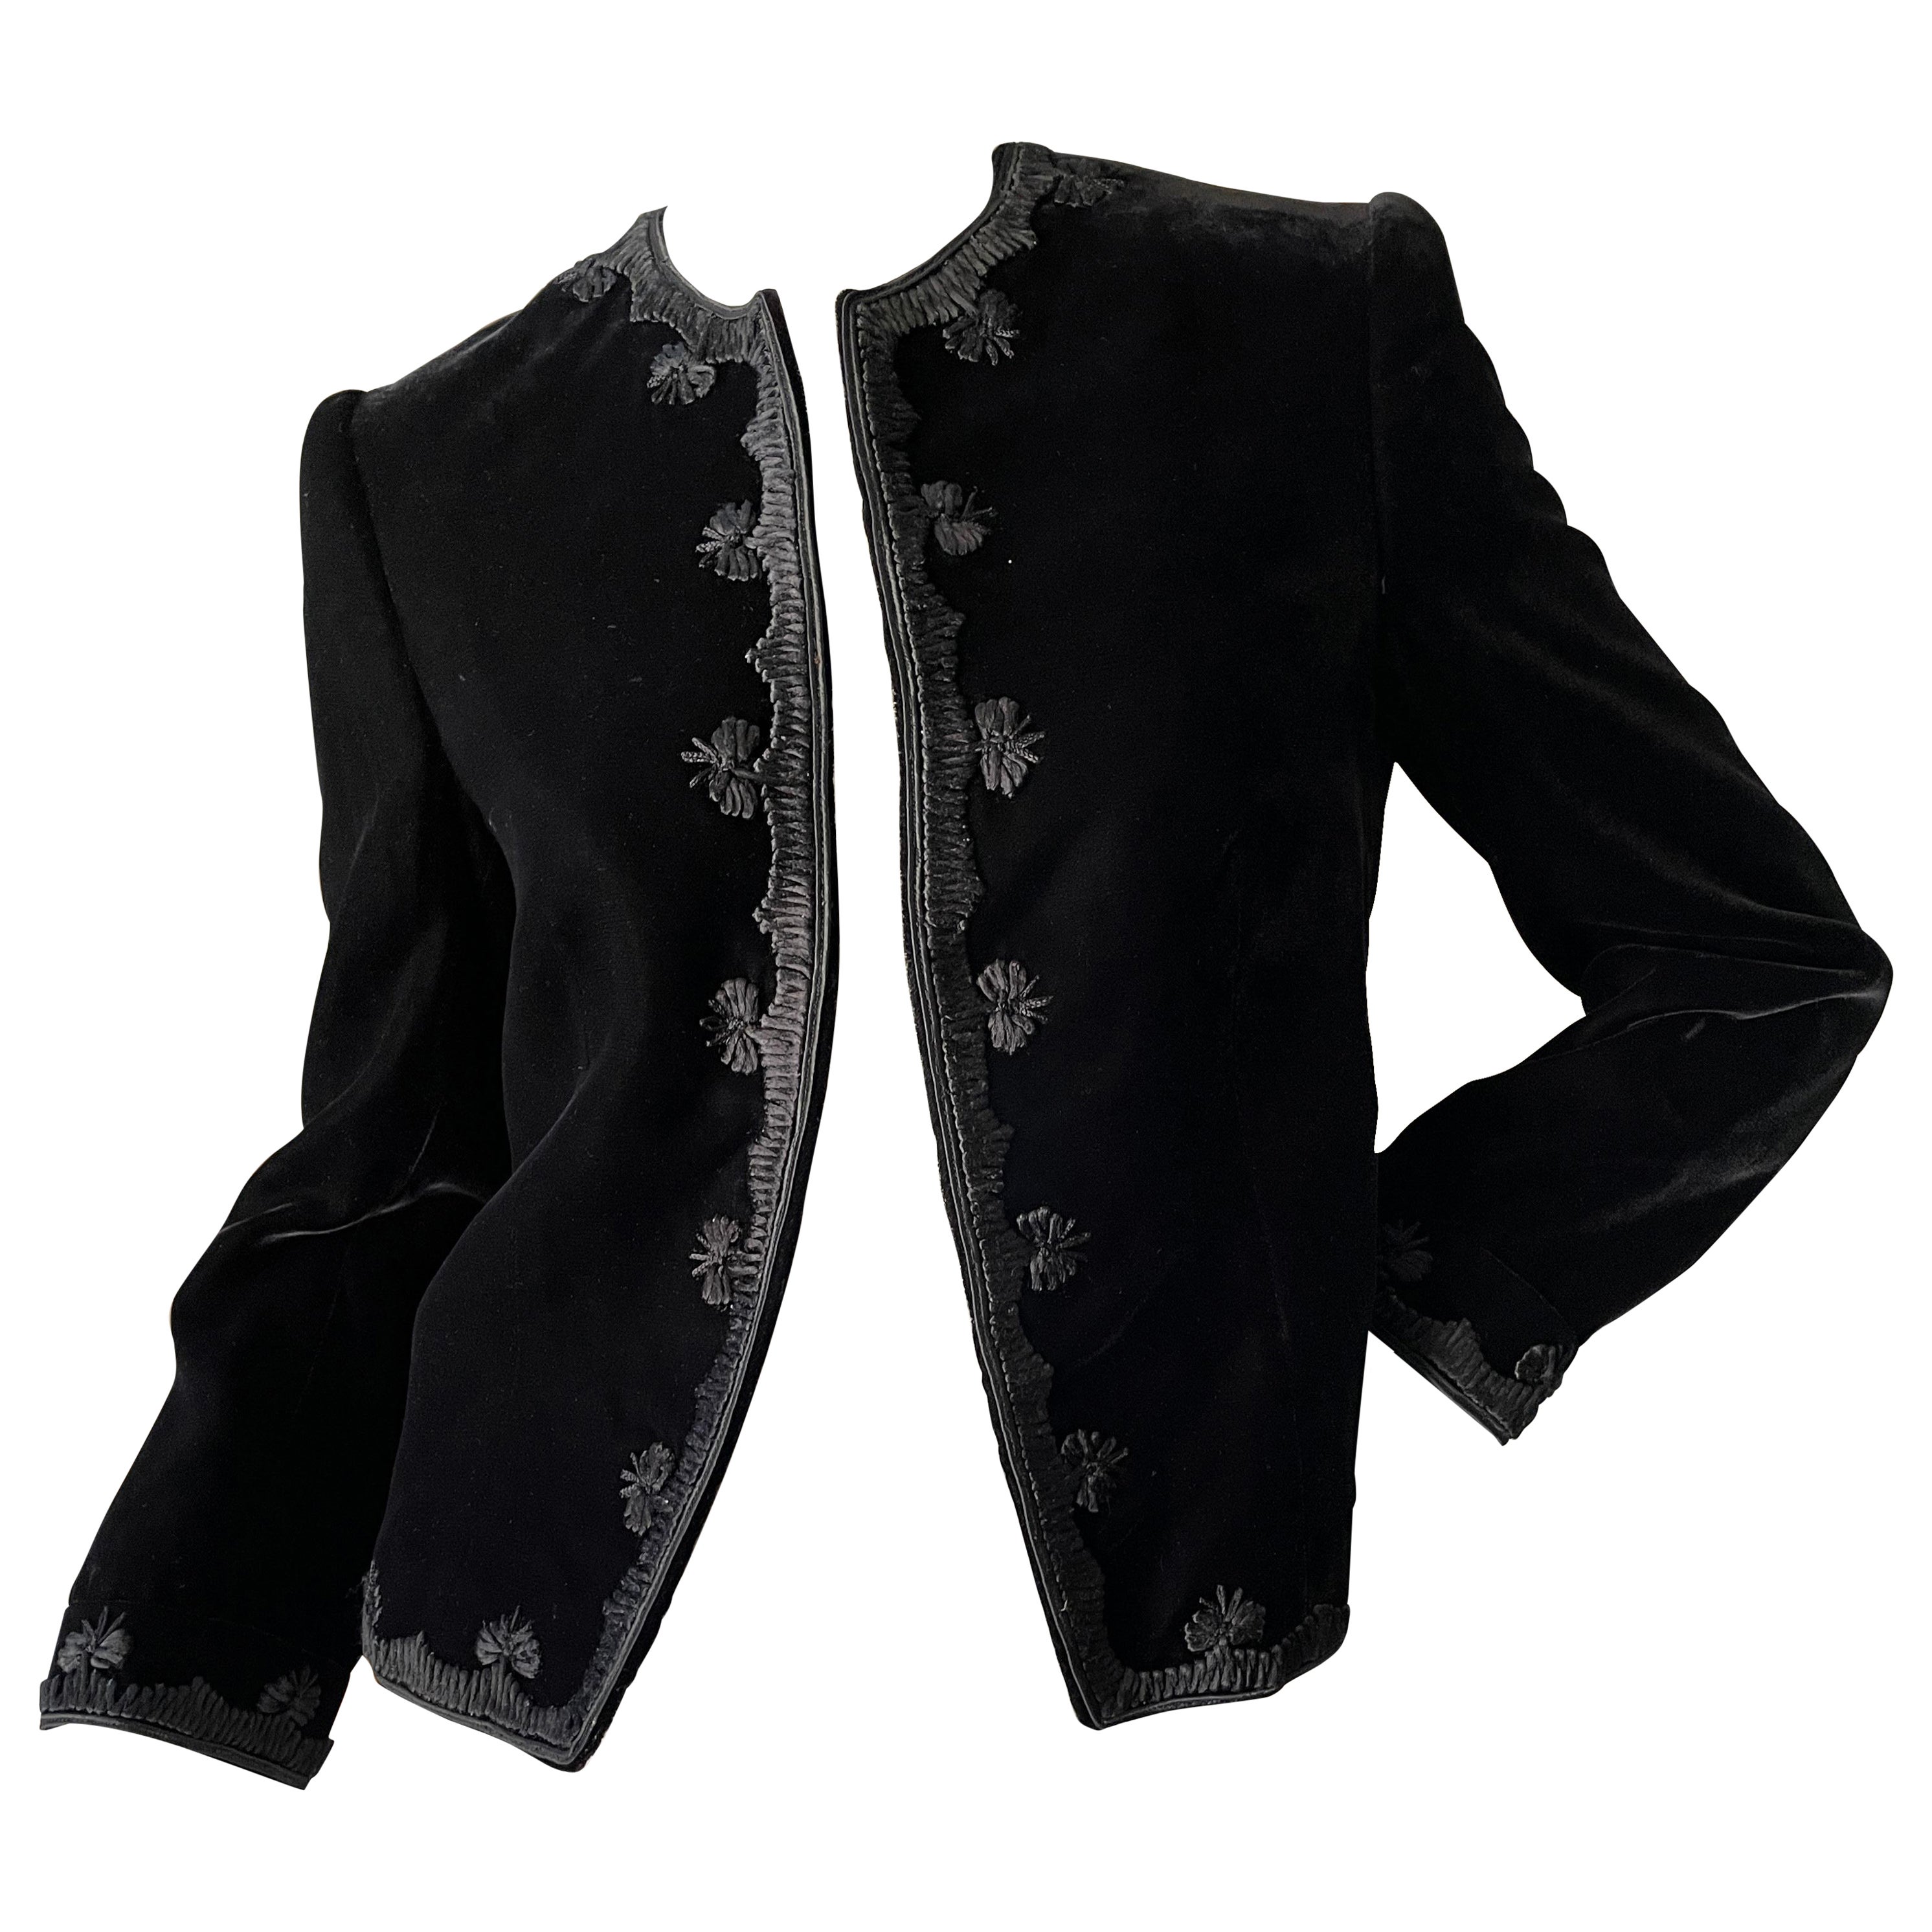 Jean-Louis Couture 1960's Black Velvet Jacket with Embroidered Details For Sale